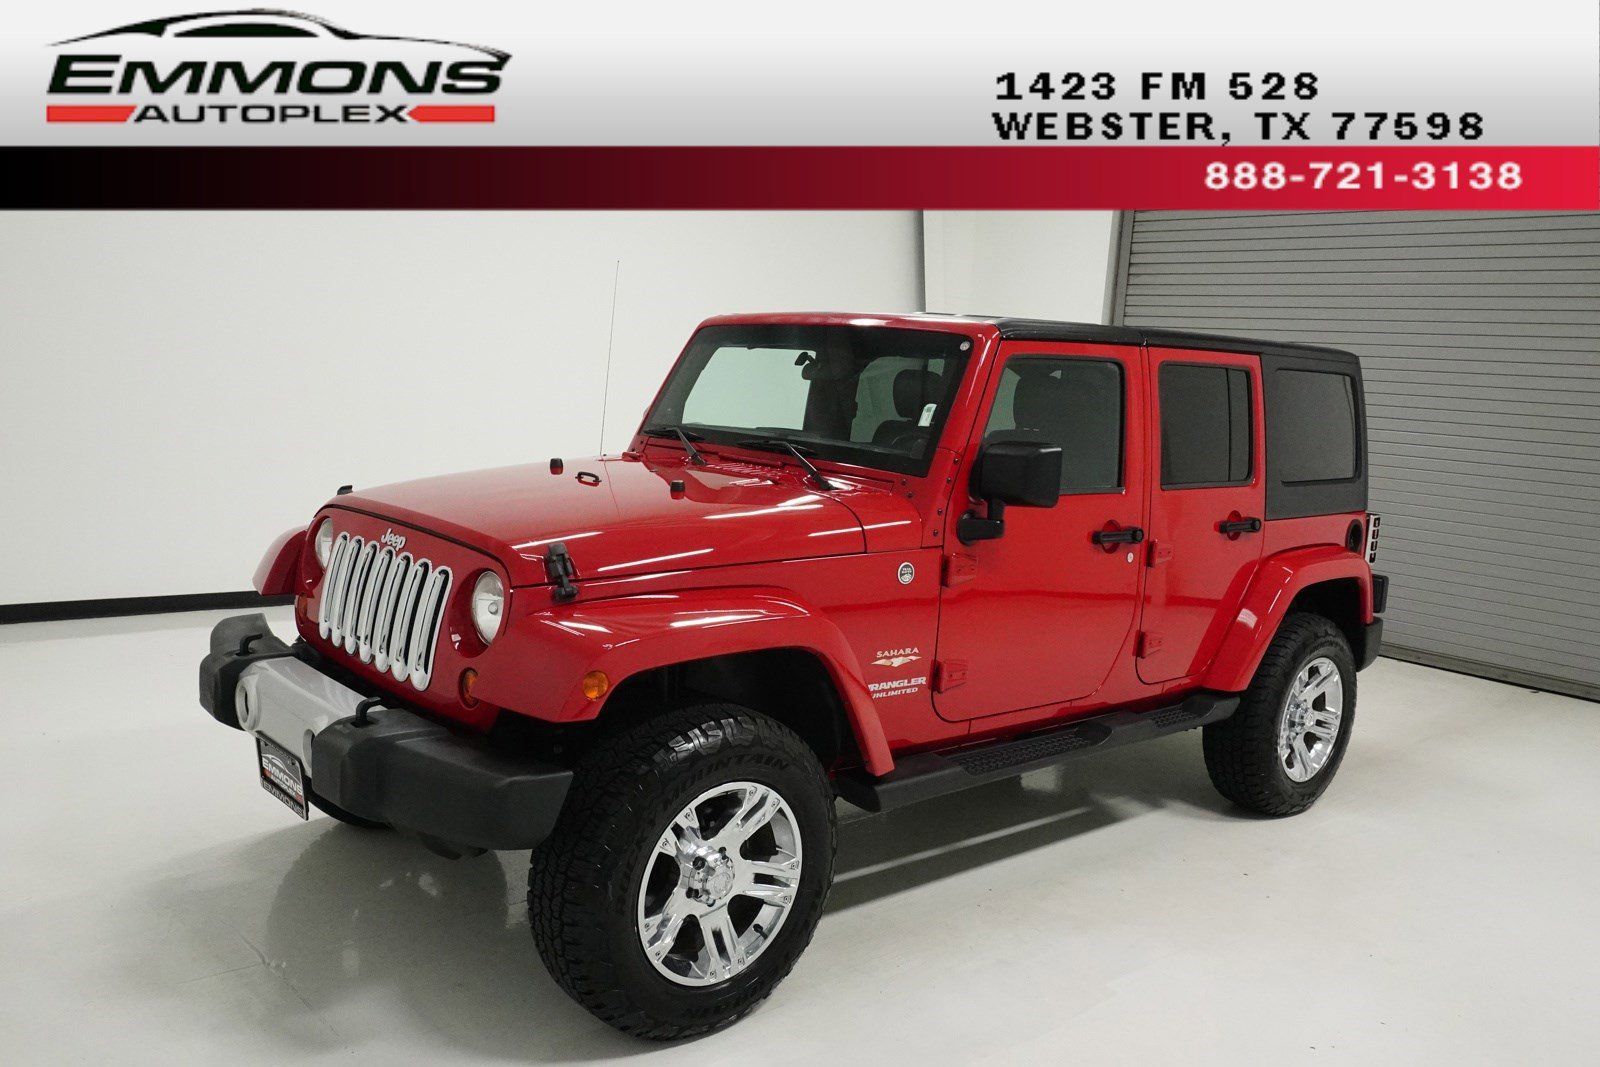 Used 2012 Jeep Wrangler Unlimited